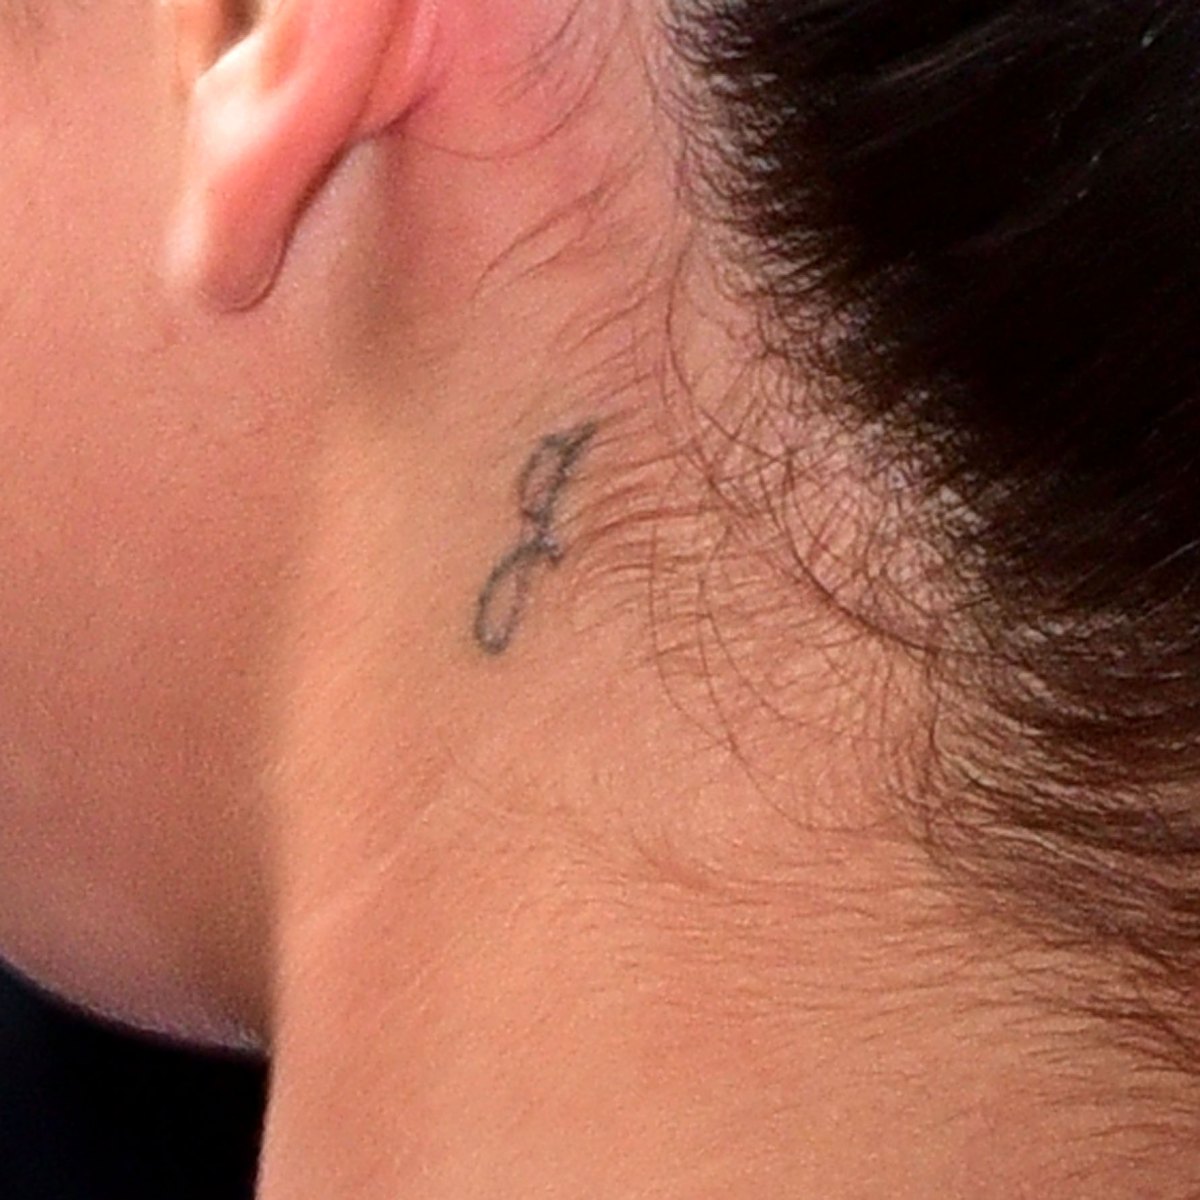 Selena Gomez's Tattoos: She Has More Ink Than We Realized!